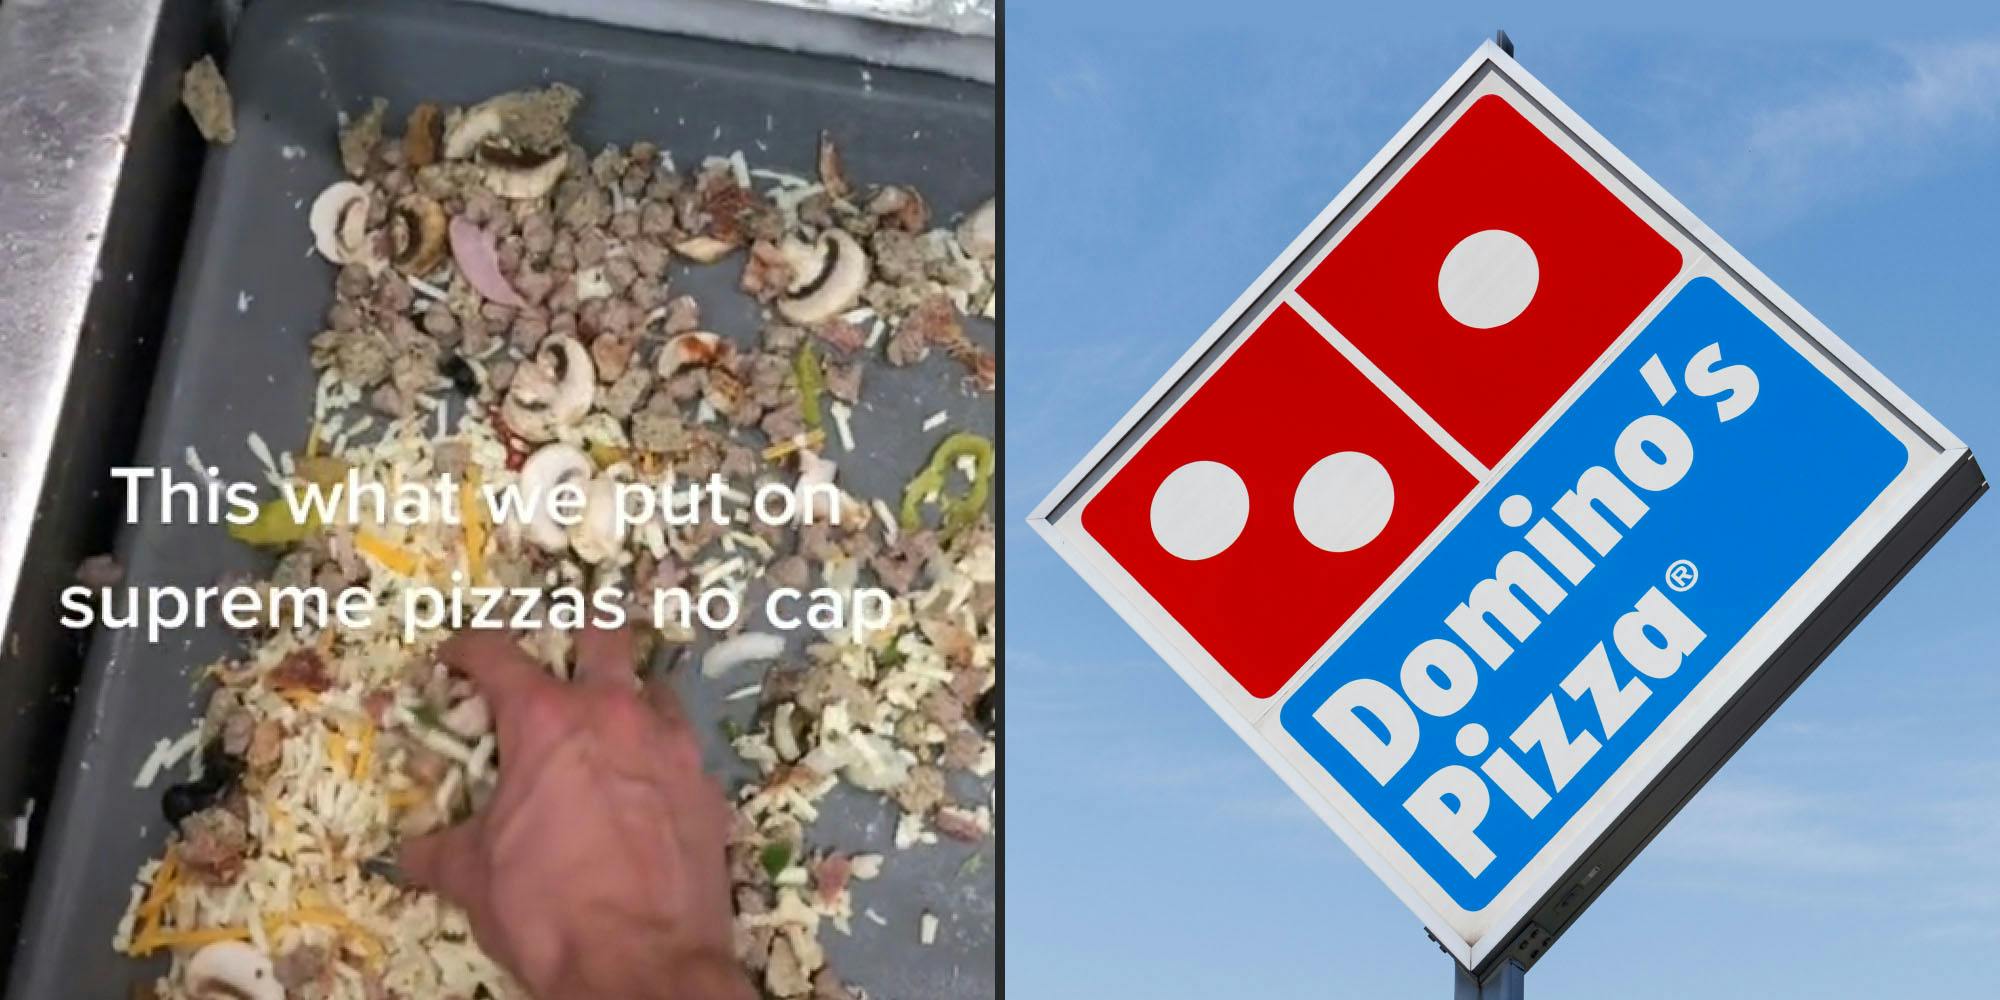 dominoes worker hand in toppings holding them in his hand caption "This what we put on supreme pizzas no cap" (l) Domino's Pizza sign with blue sky behind (r)